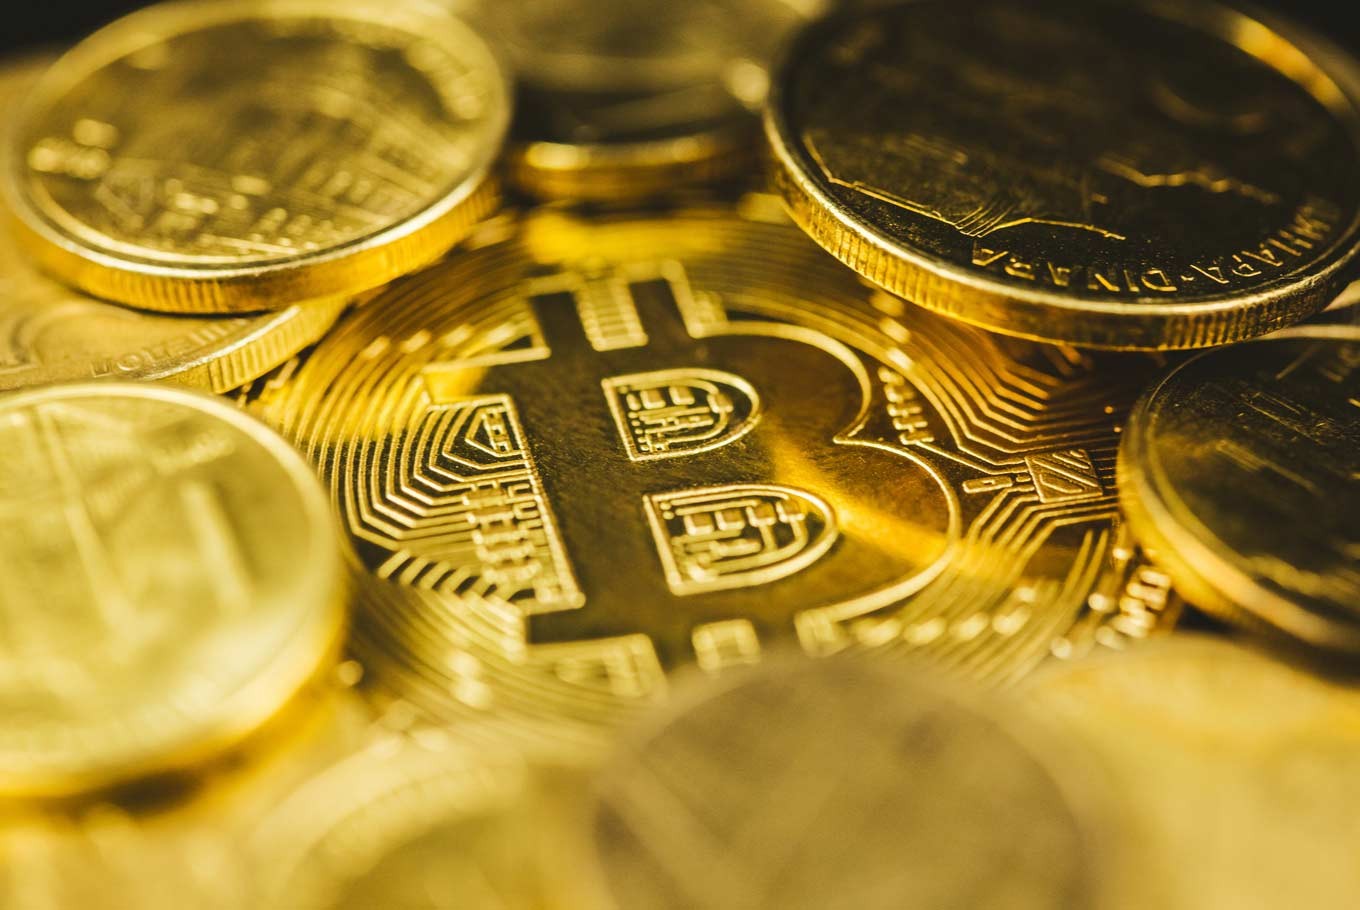 Bitcoin Tops $8,000 as it Hits Highest Since July 2018